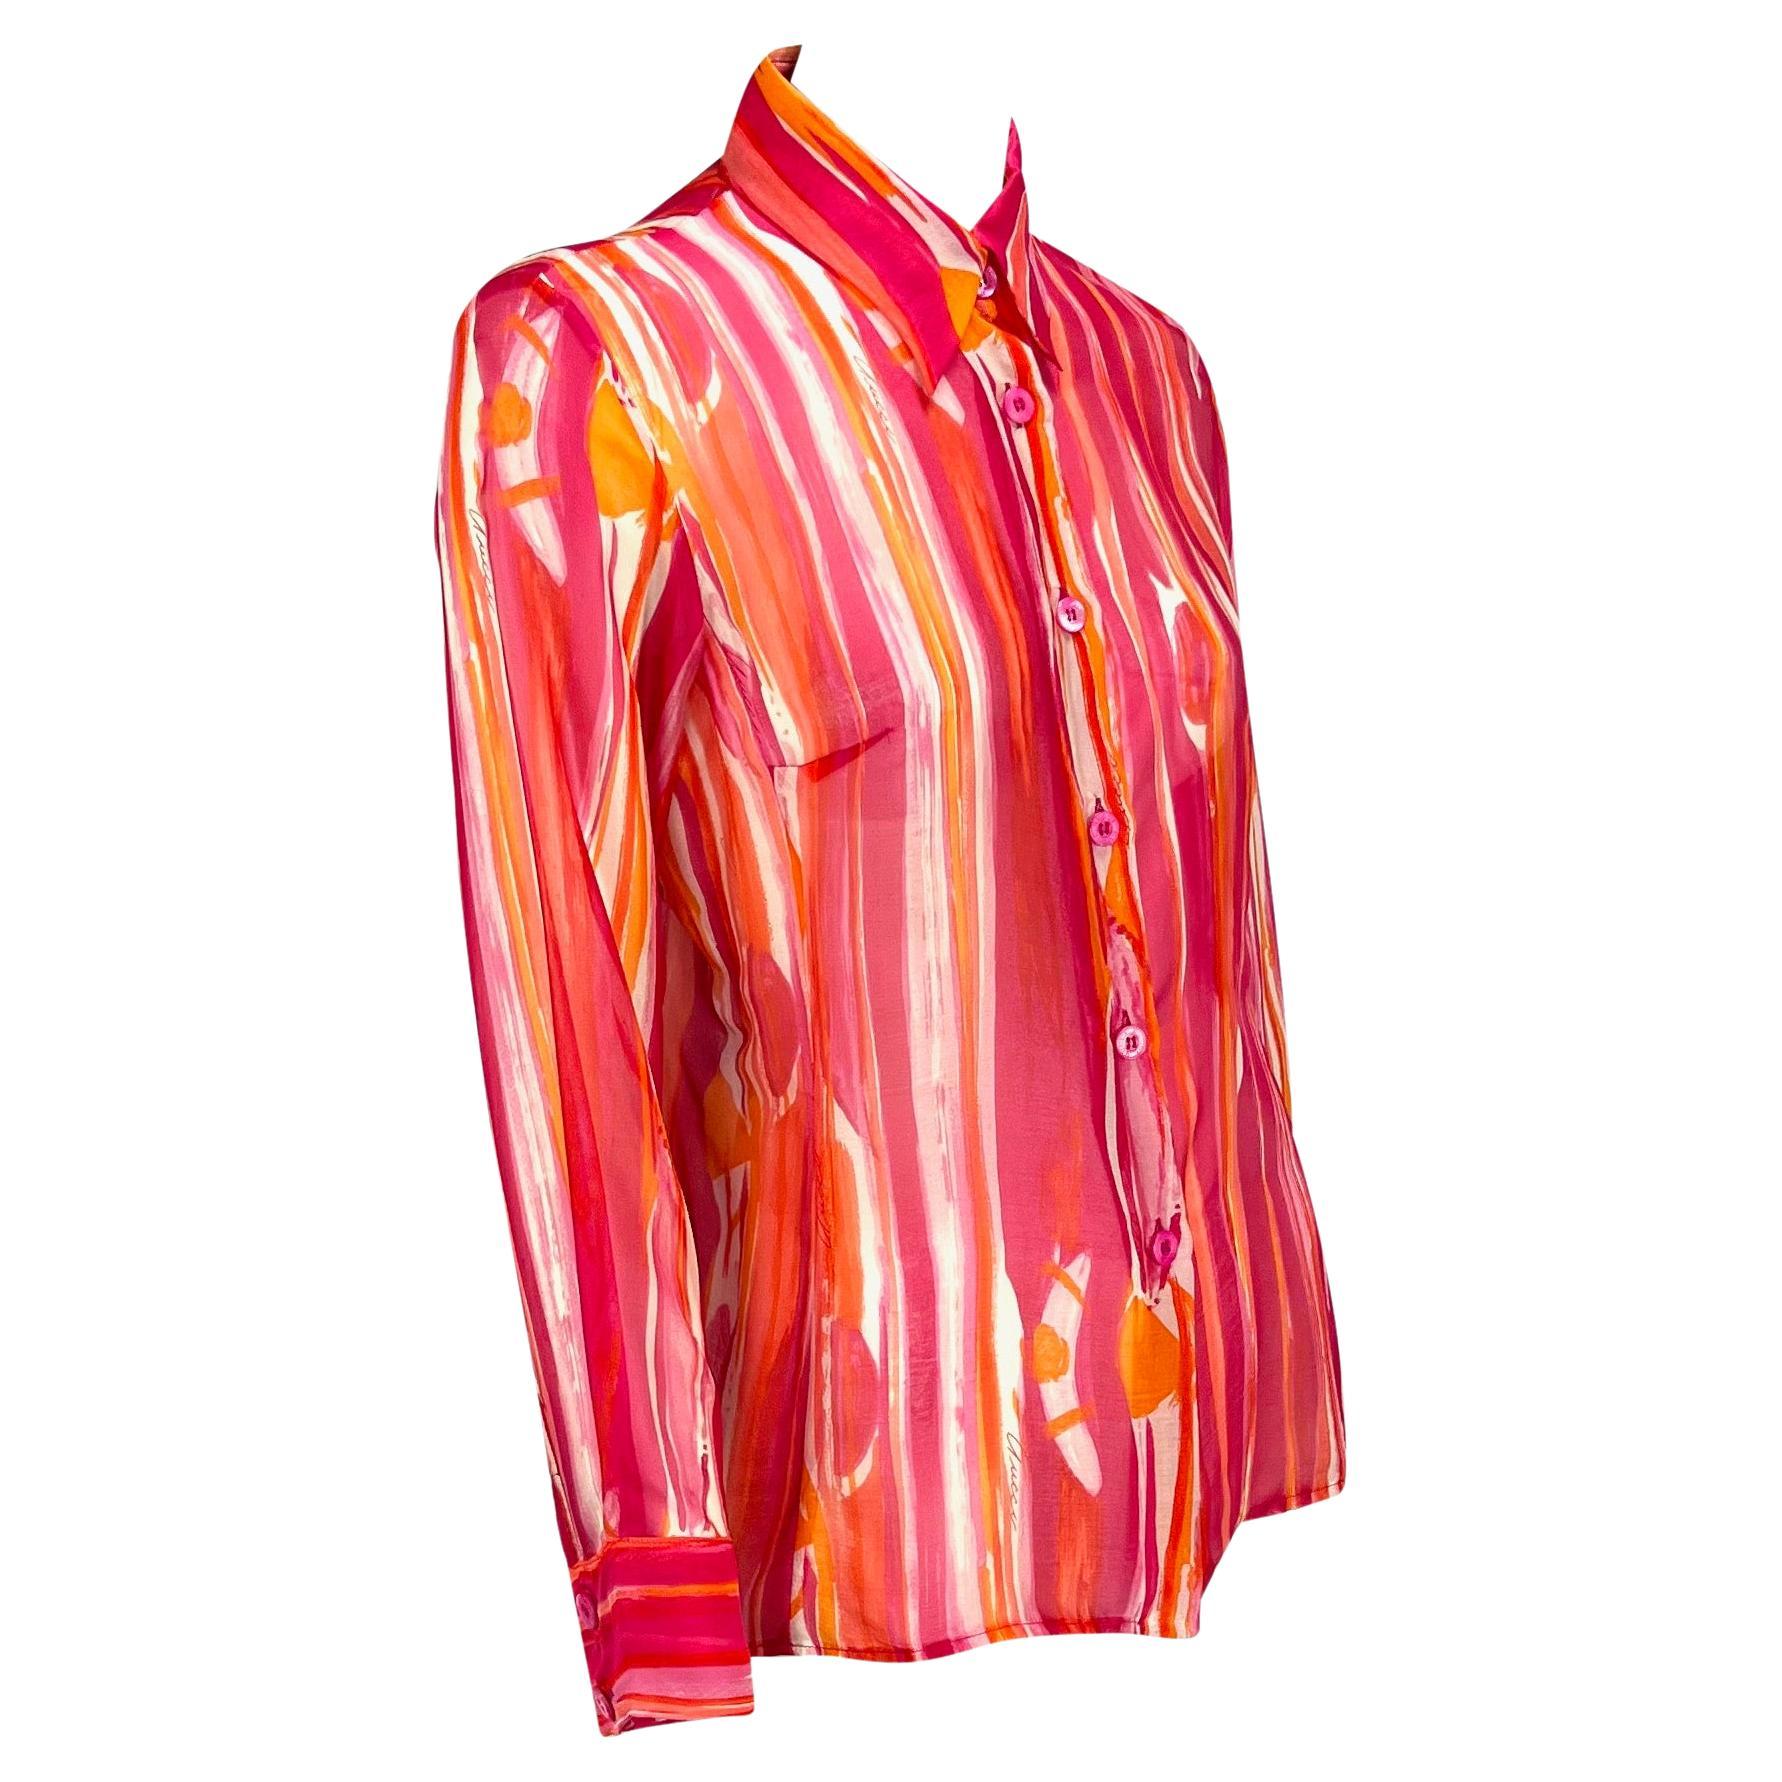 Women's S/S 1996 Gucci by Tom Ford Pink Orange Sheer Abstract Watercolor Button Up Top For Sale